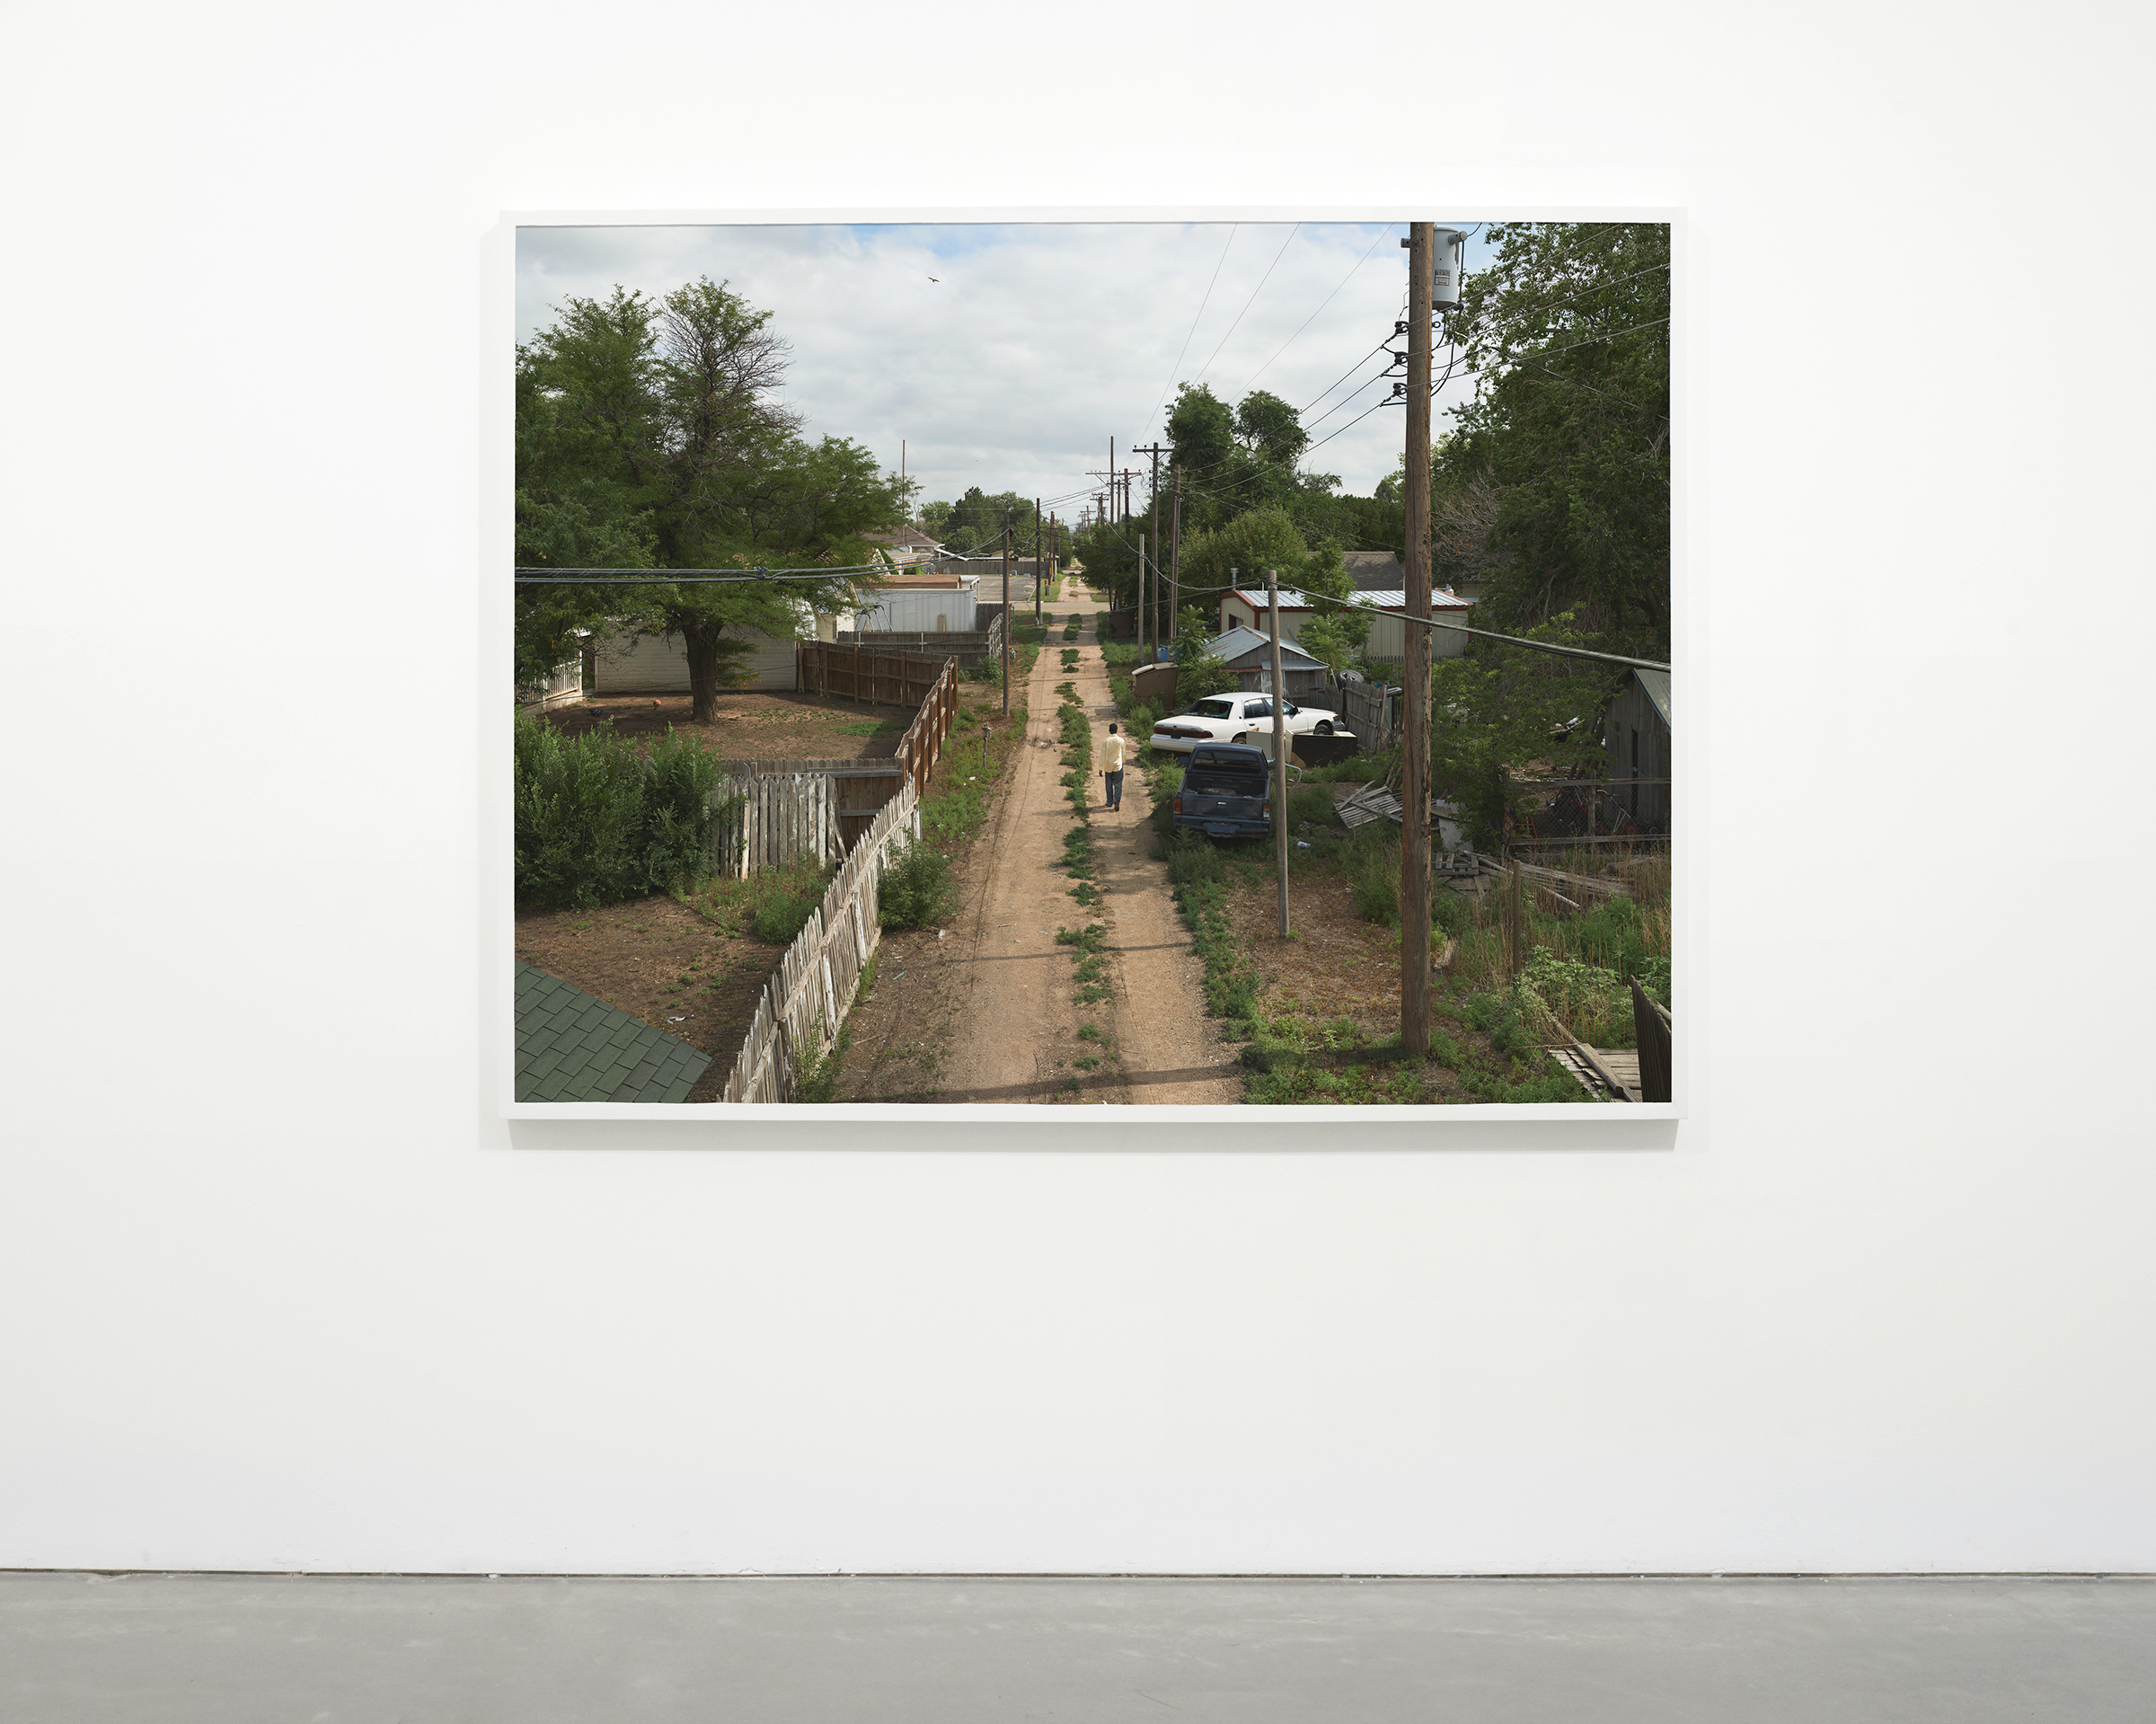  “Alley”, 2013 - 2015  54 x 71.75 in (137.15 x 182.25 cm) 